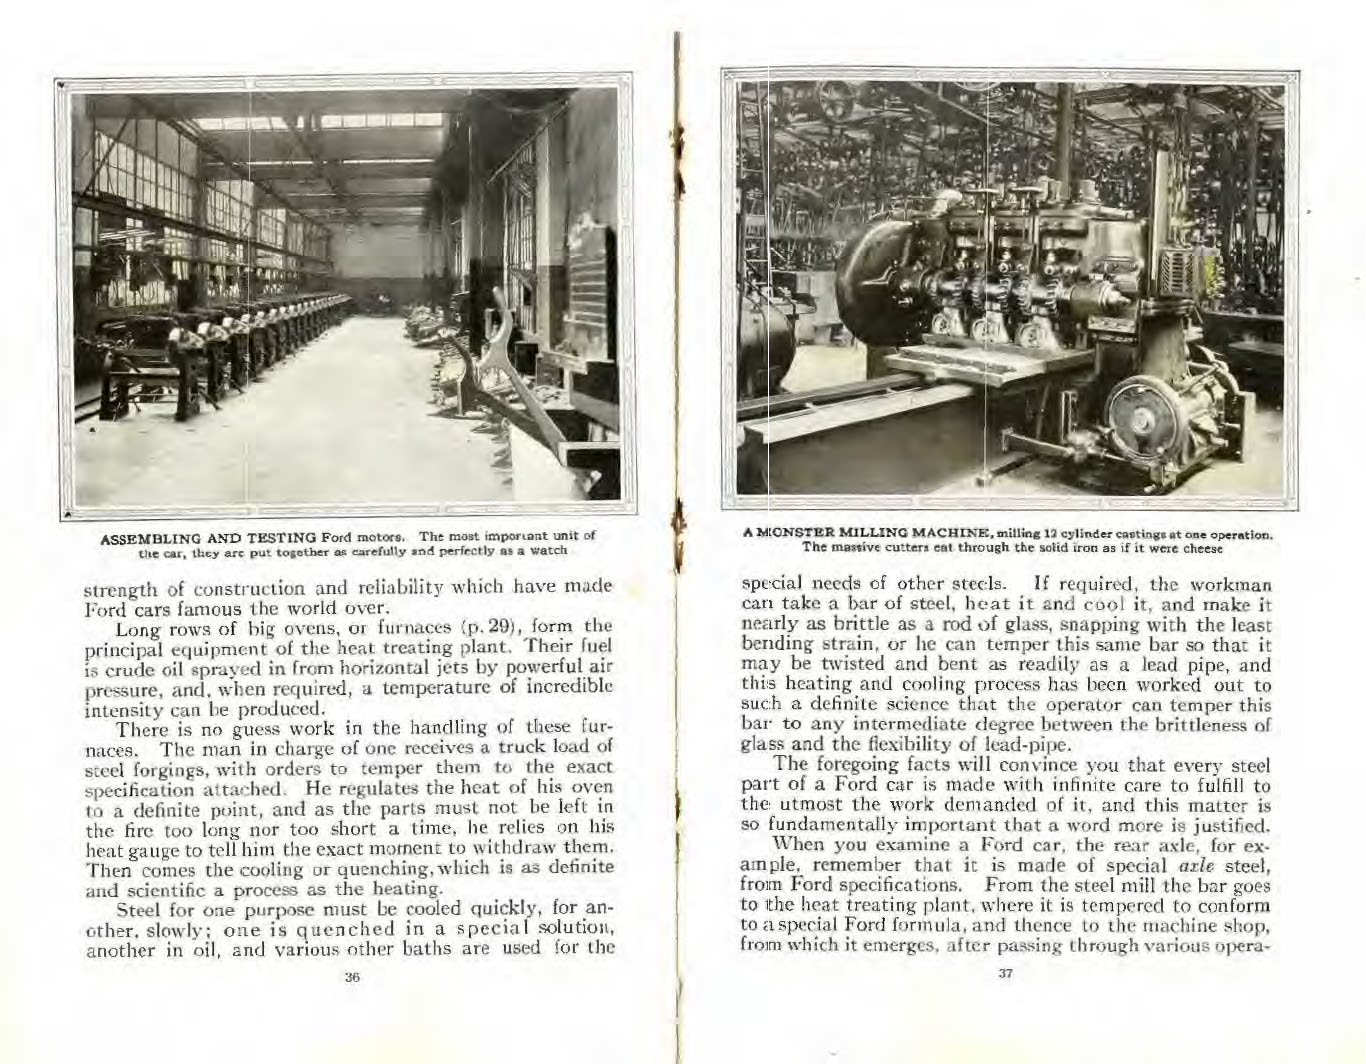 1912_Ford_Factory_Facts_Cdn-36-37